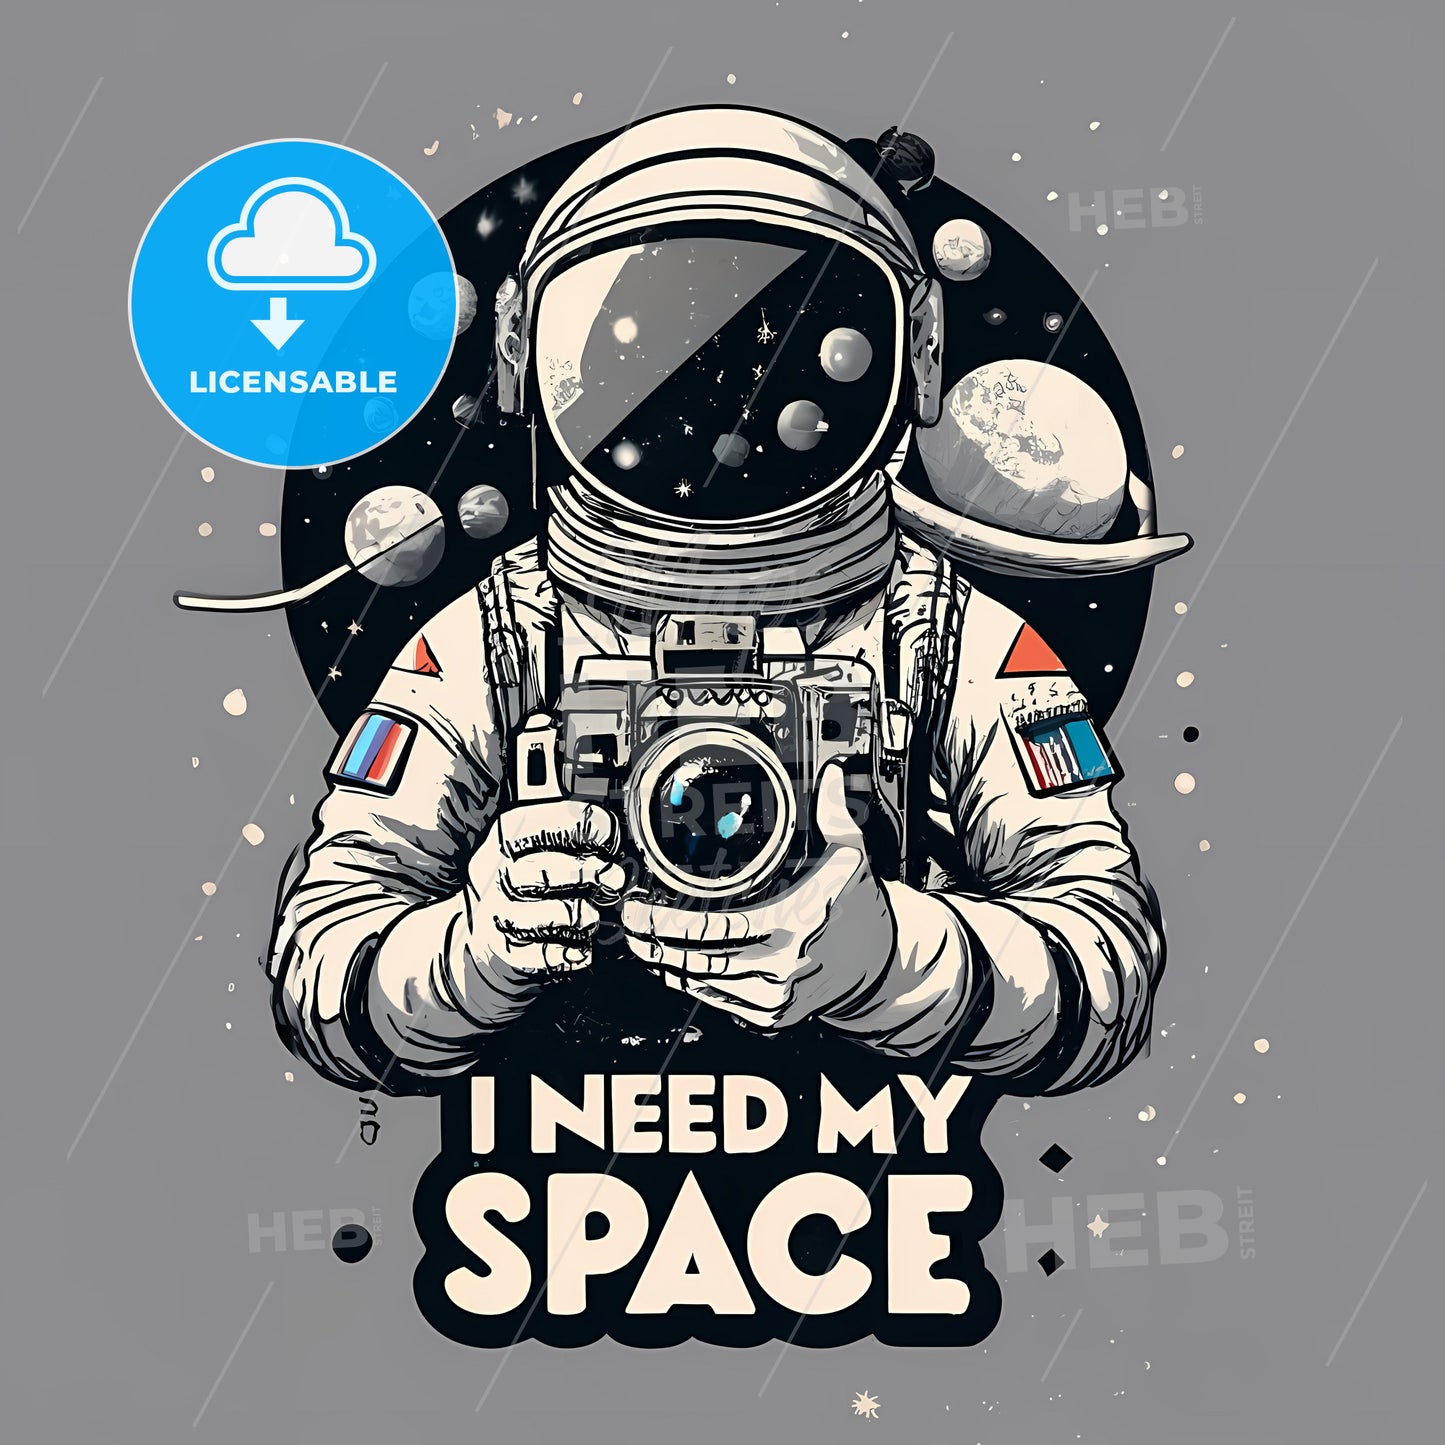 I Need My Space - A Person In An Astronaut Suit Holding A Camera